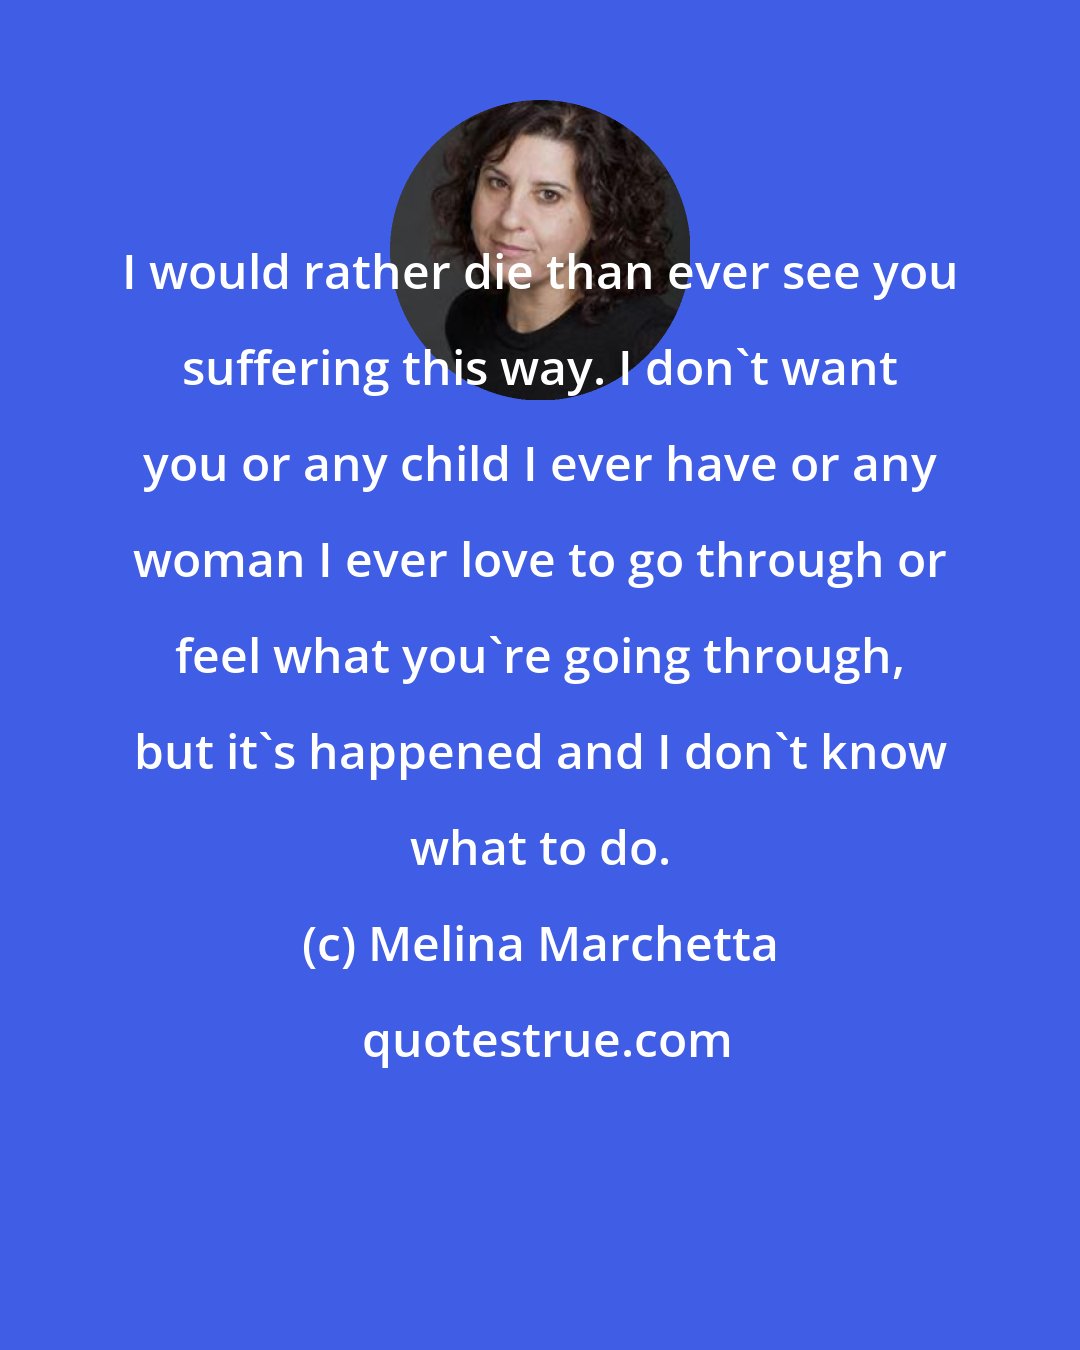 Melina Marchetta: I would rather die than ever see you suffering this way. I don't want you or any child I ever have or any woman I ever love to go through or feel what you're going through, but it's happened and I don't know what to do.